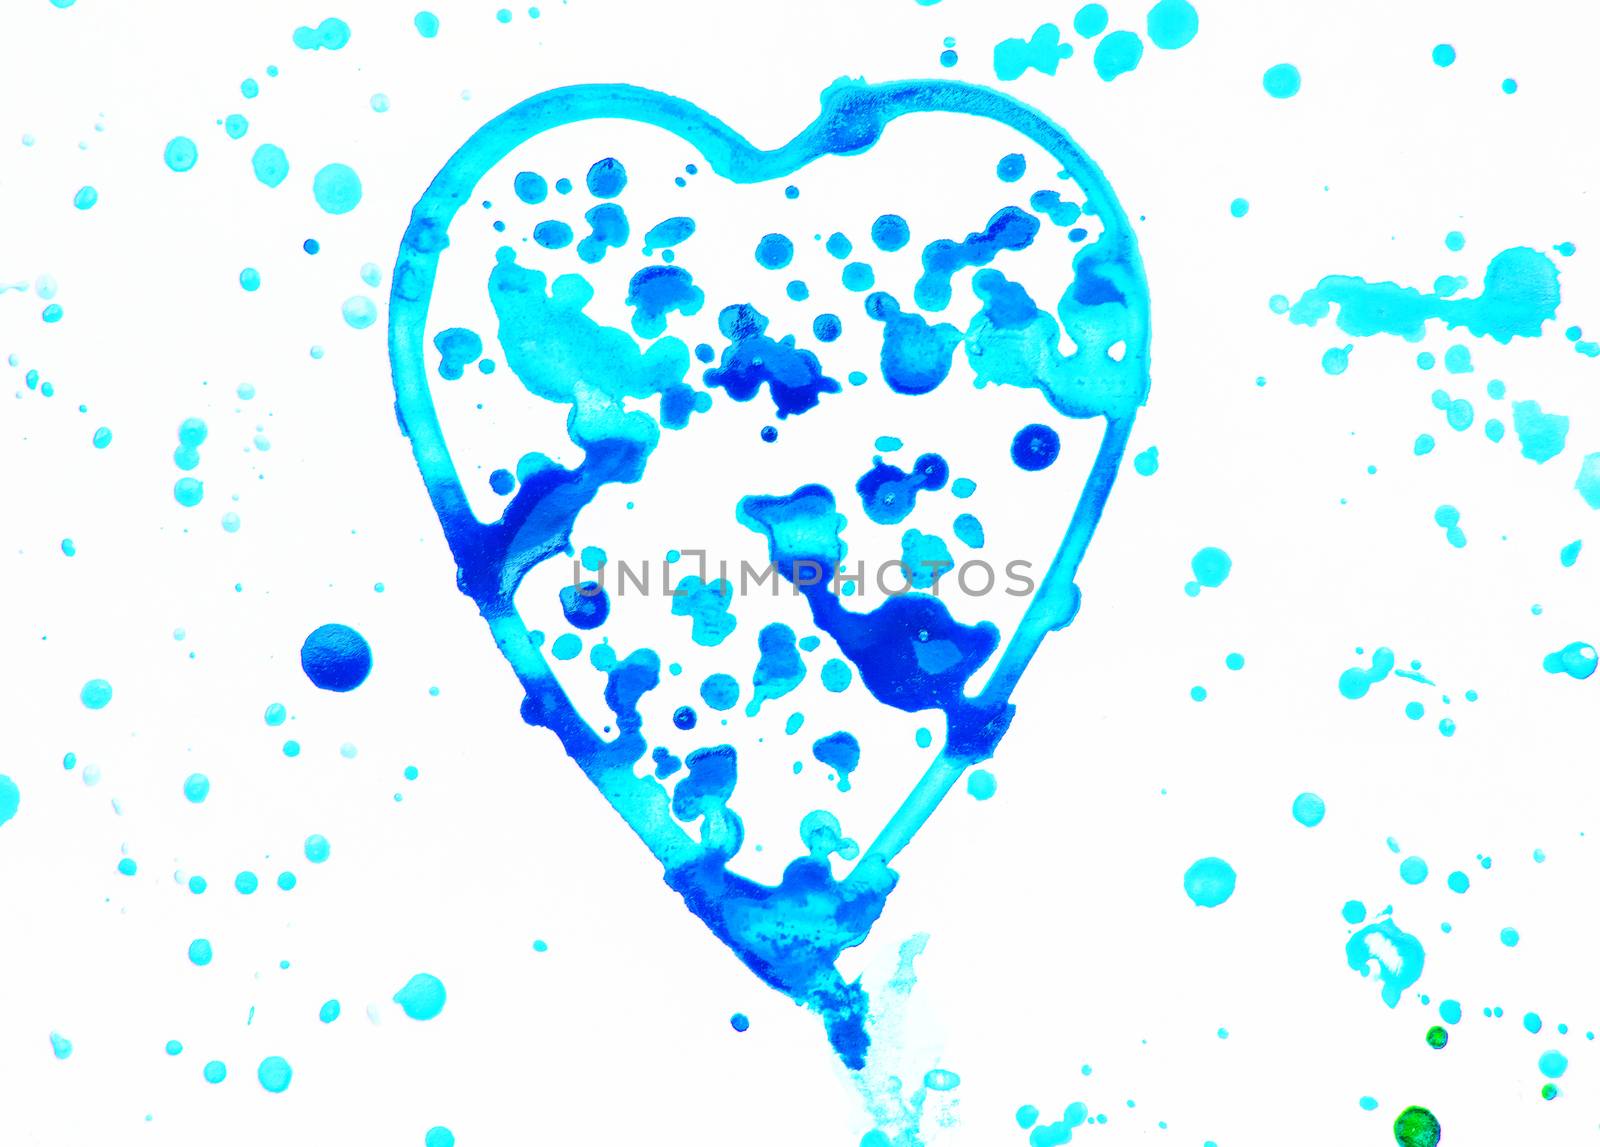 Heart with splashes of bright blue, blue and purple watercolor on white background, cute, pattern, hand painted by claire_lucia